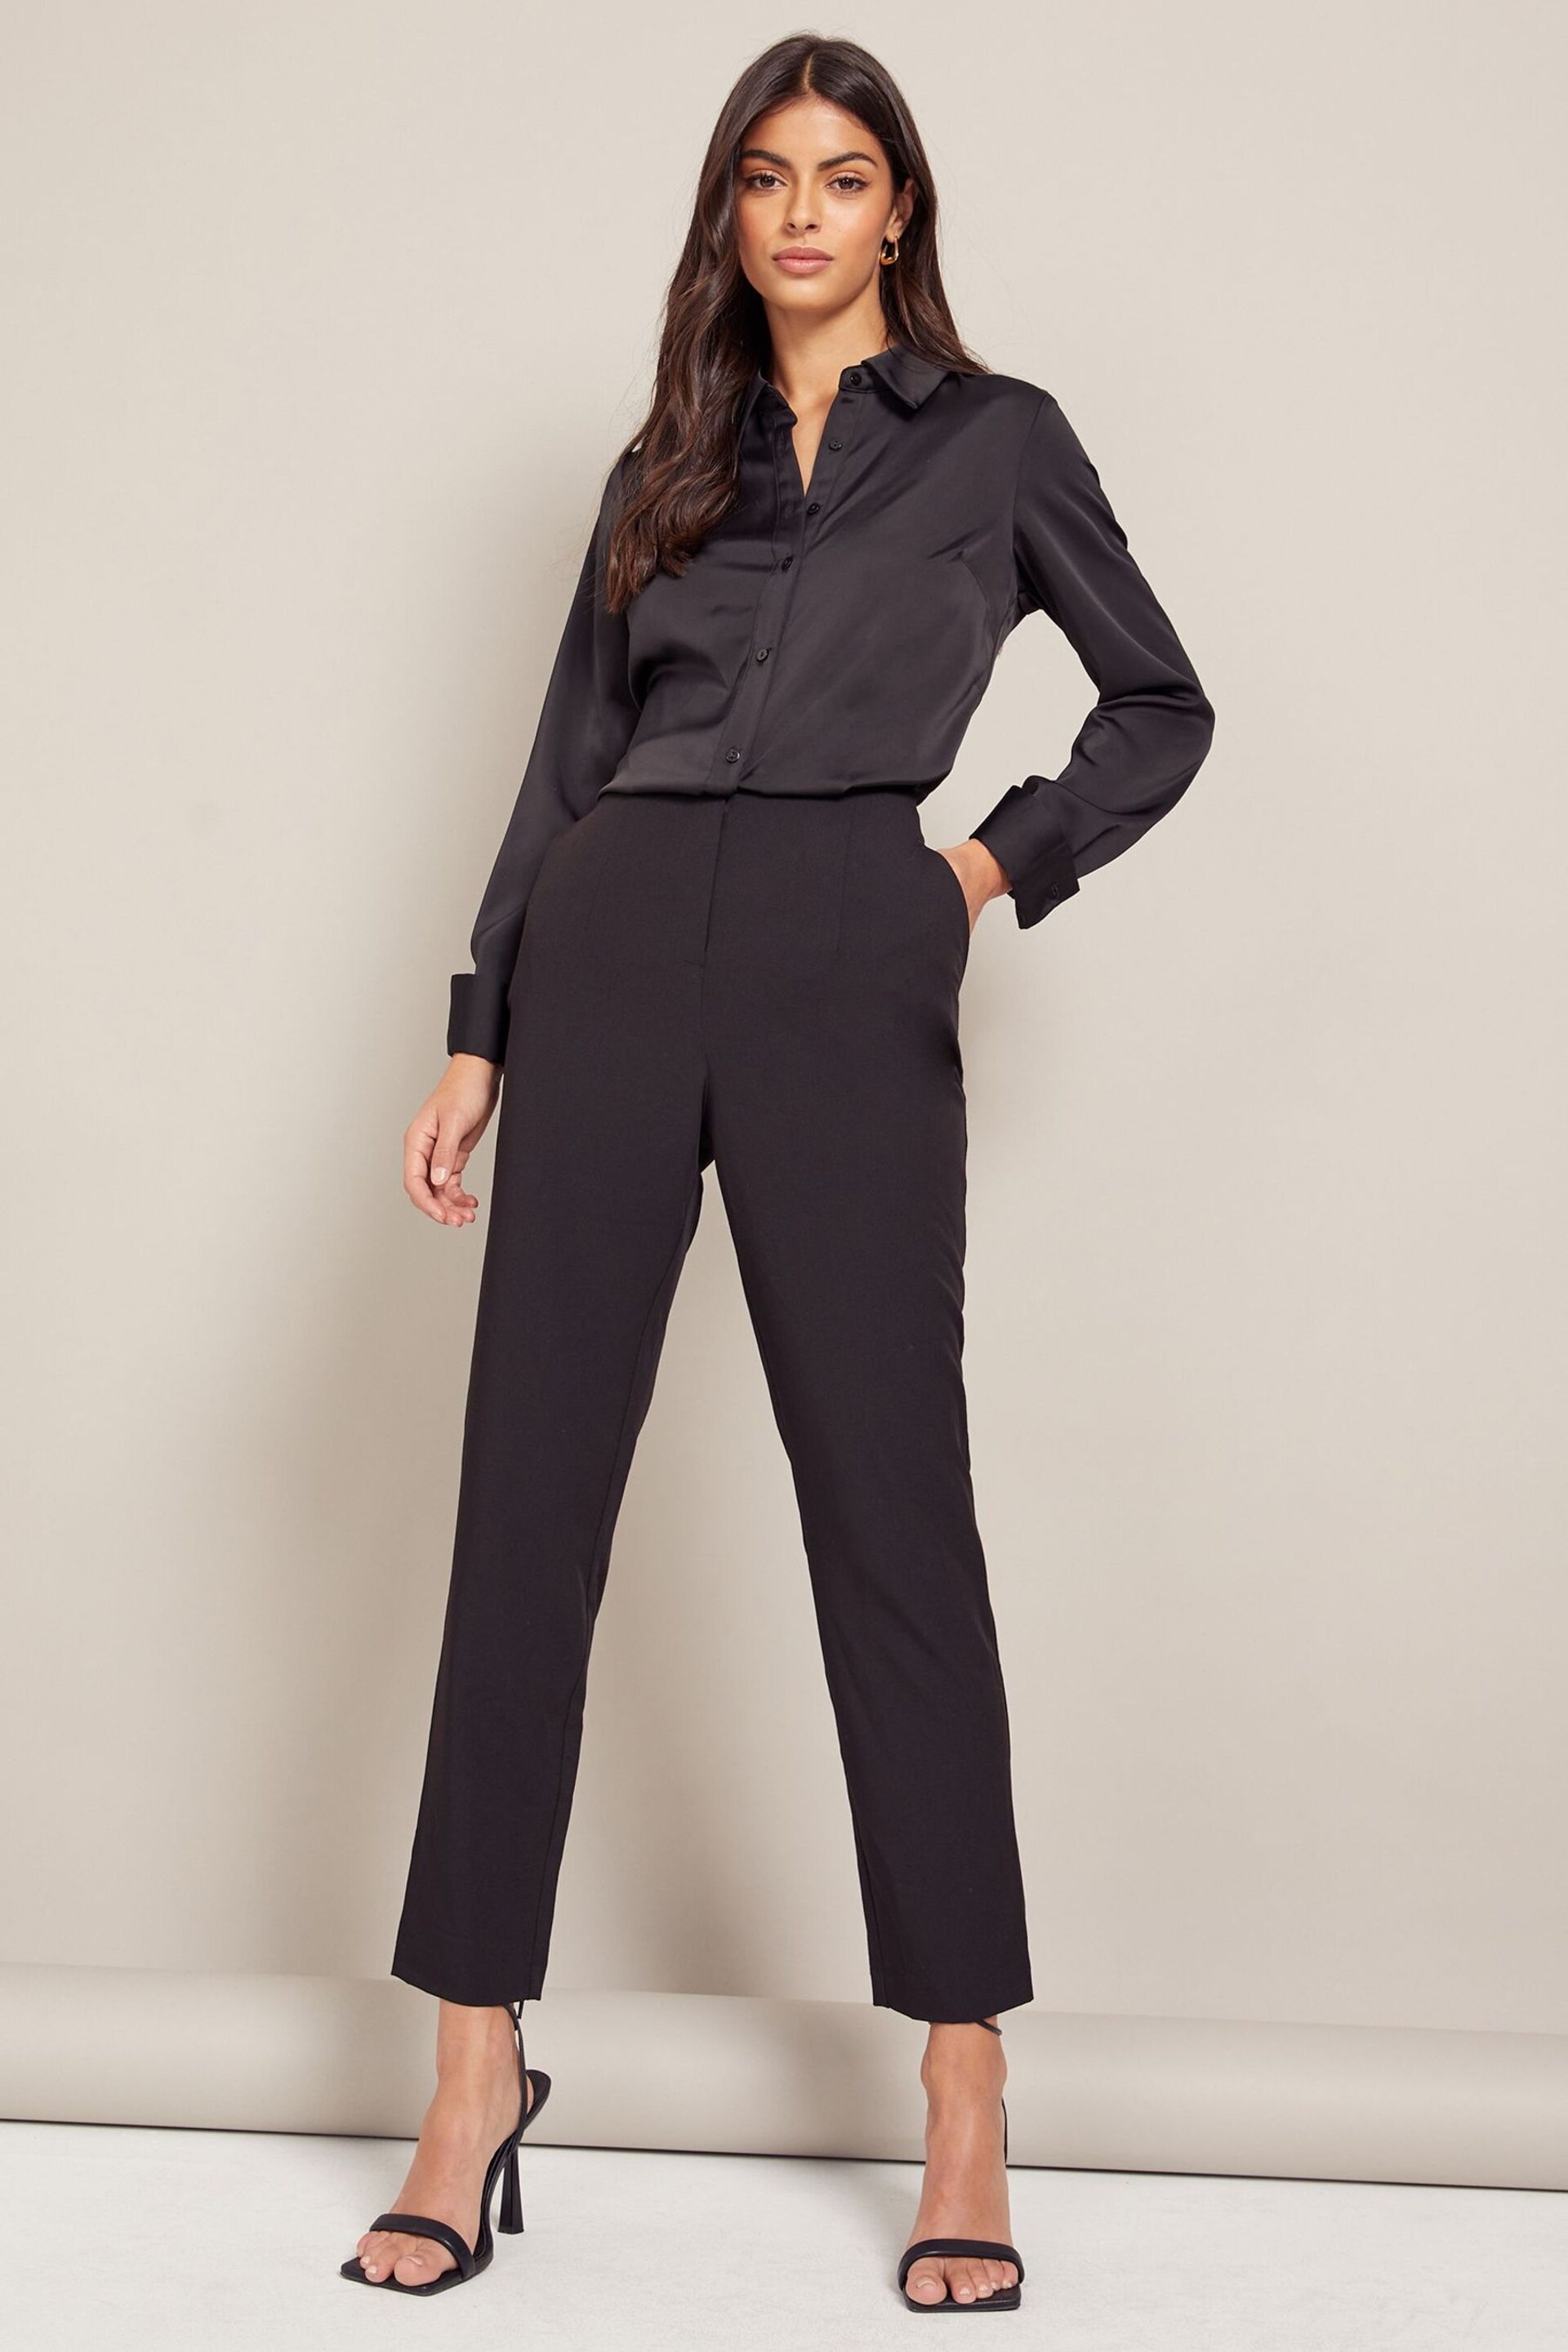 Friends Like These Black High Waisted Slim Tailored Trouser - Image 3 of 4